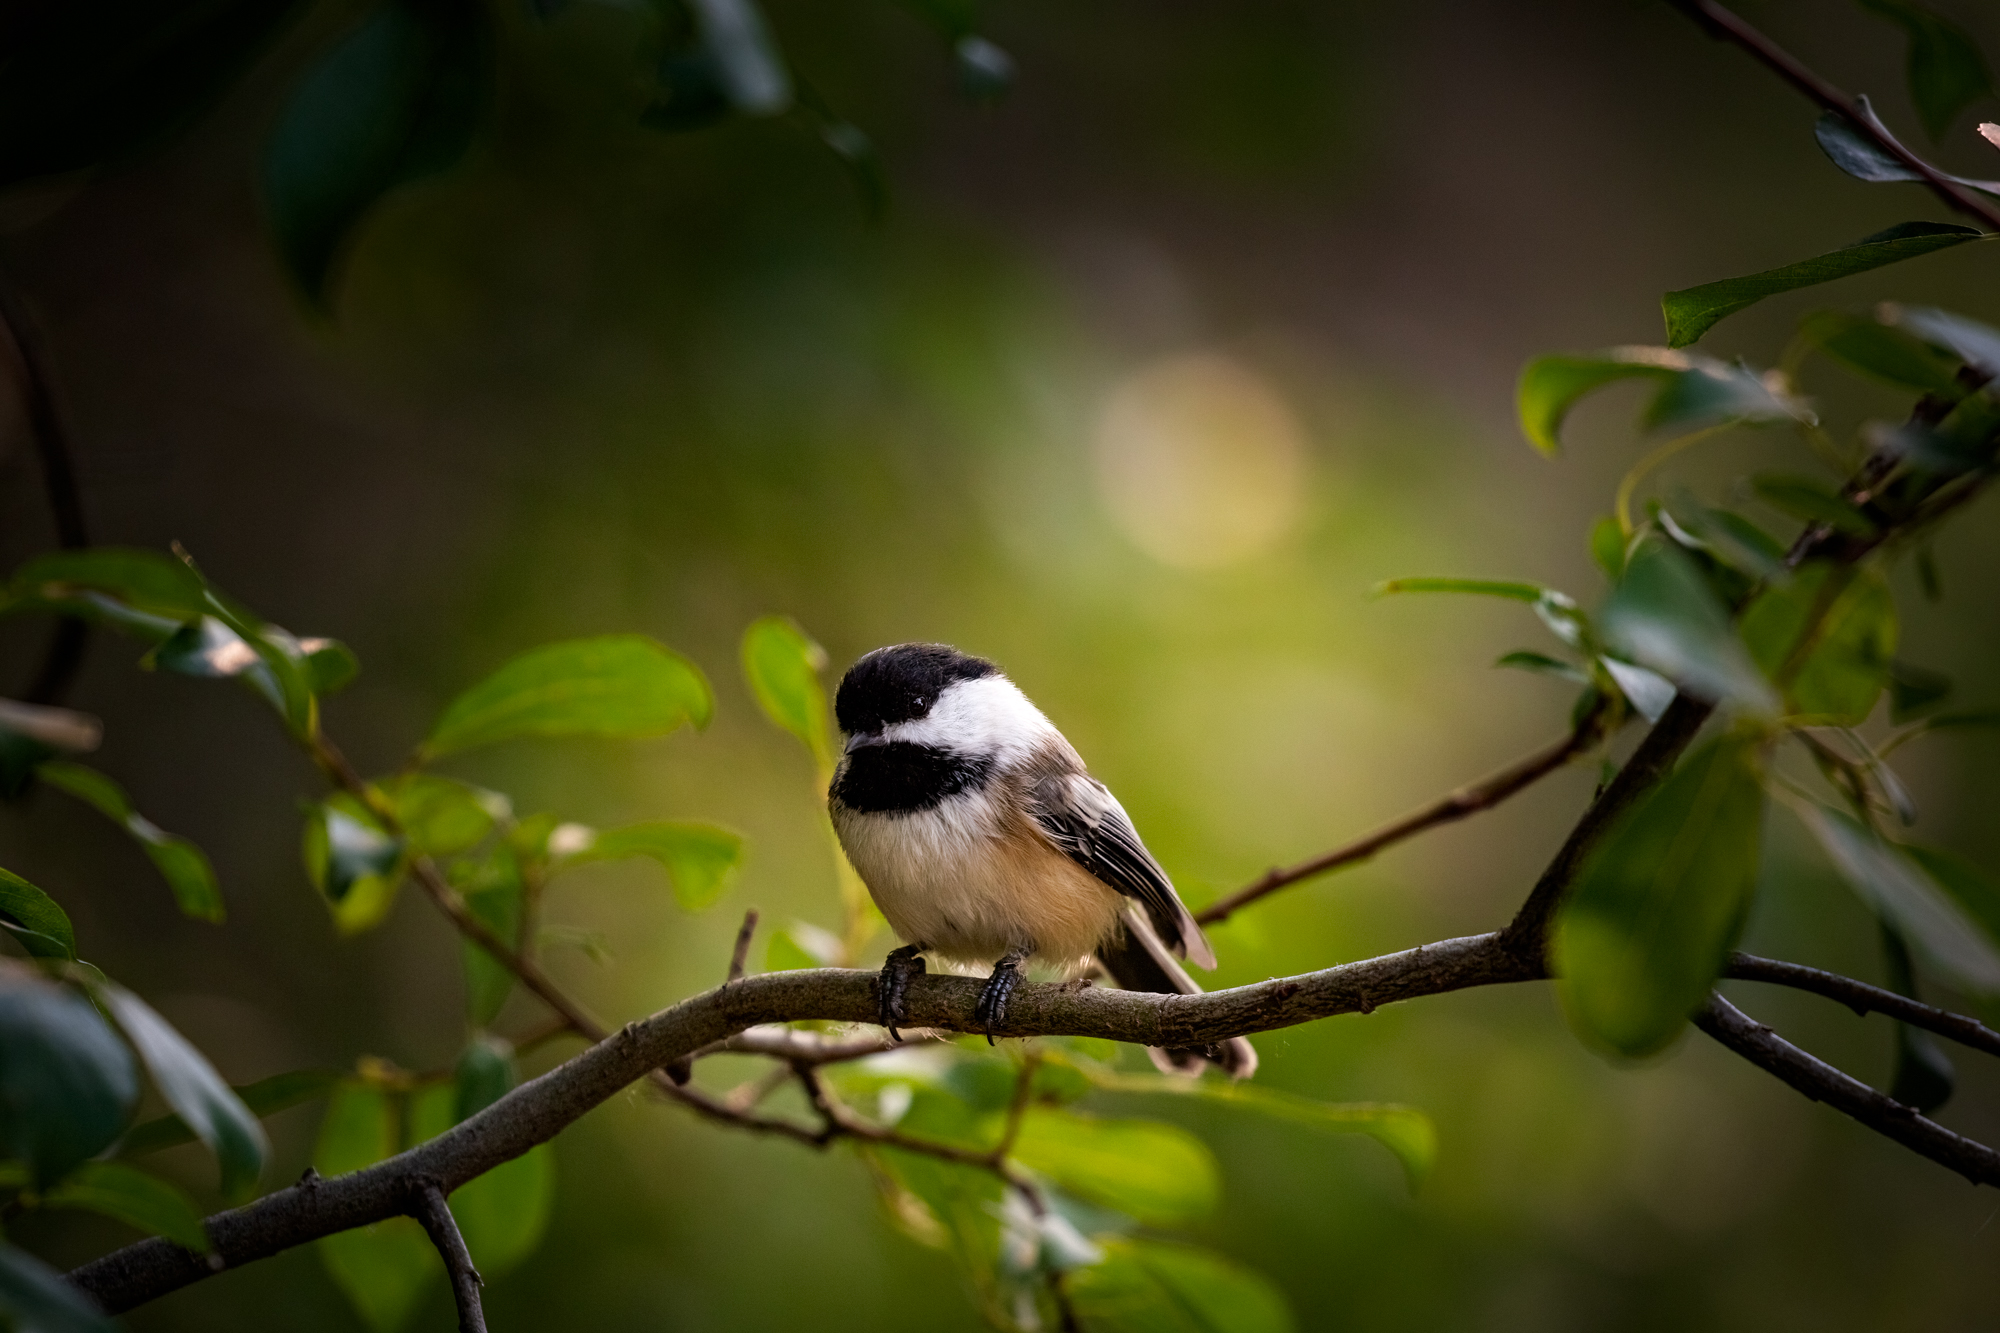 Black Capped chickadee sitting on a branch with leaves. Background is green, bokeh is present.